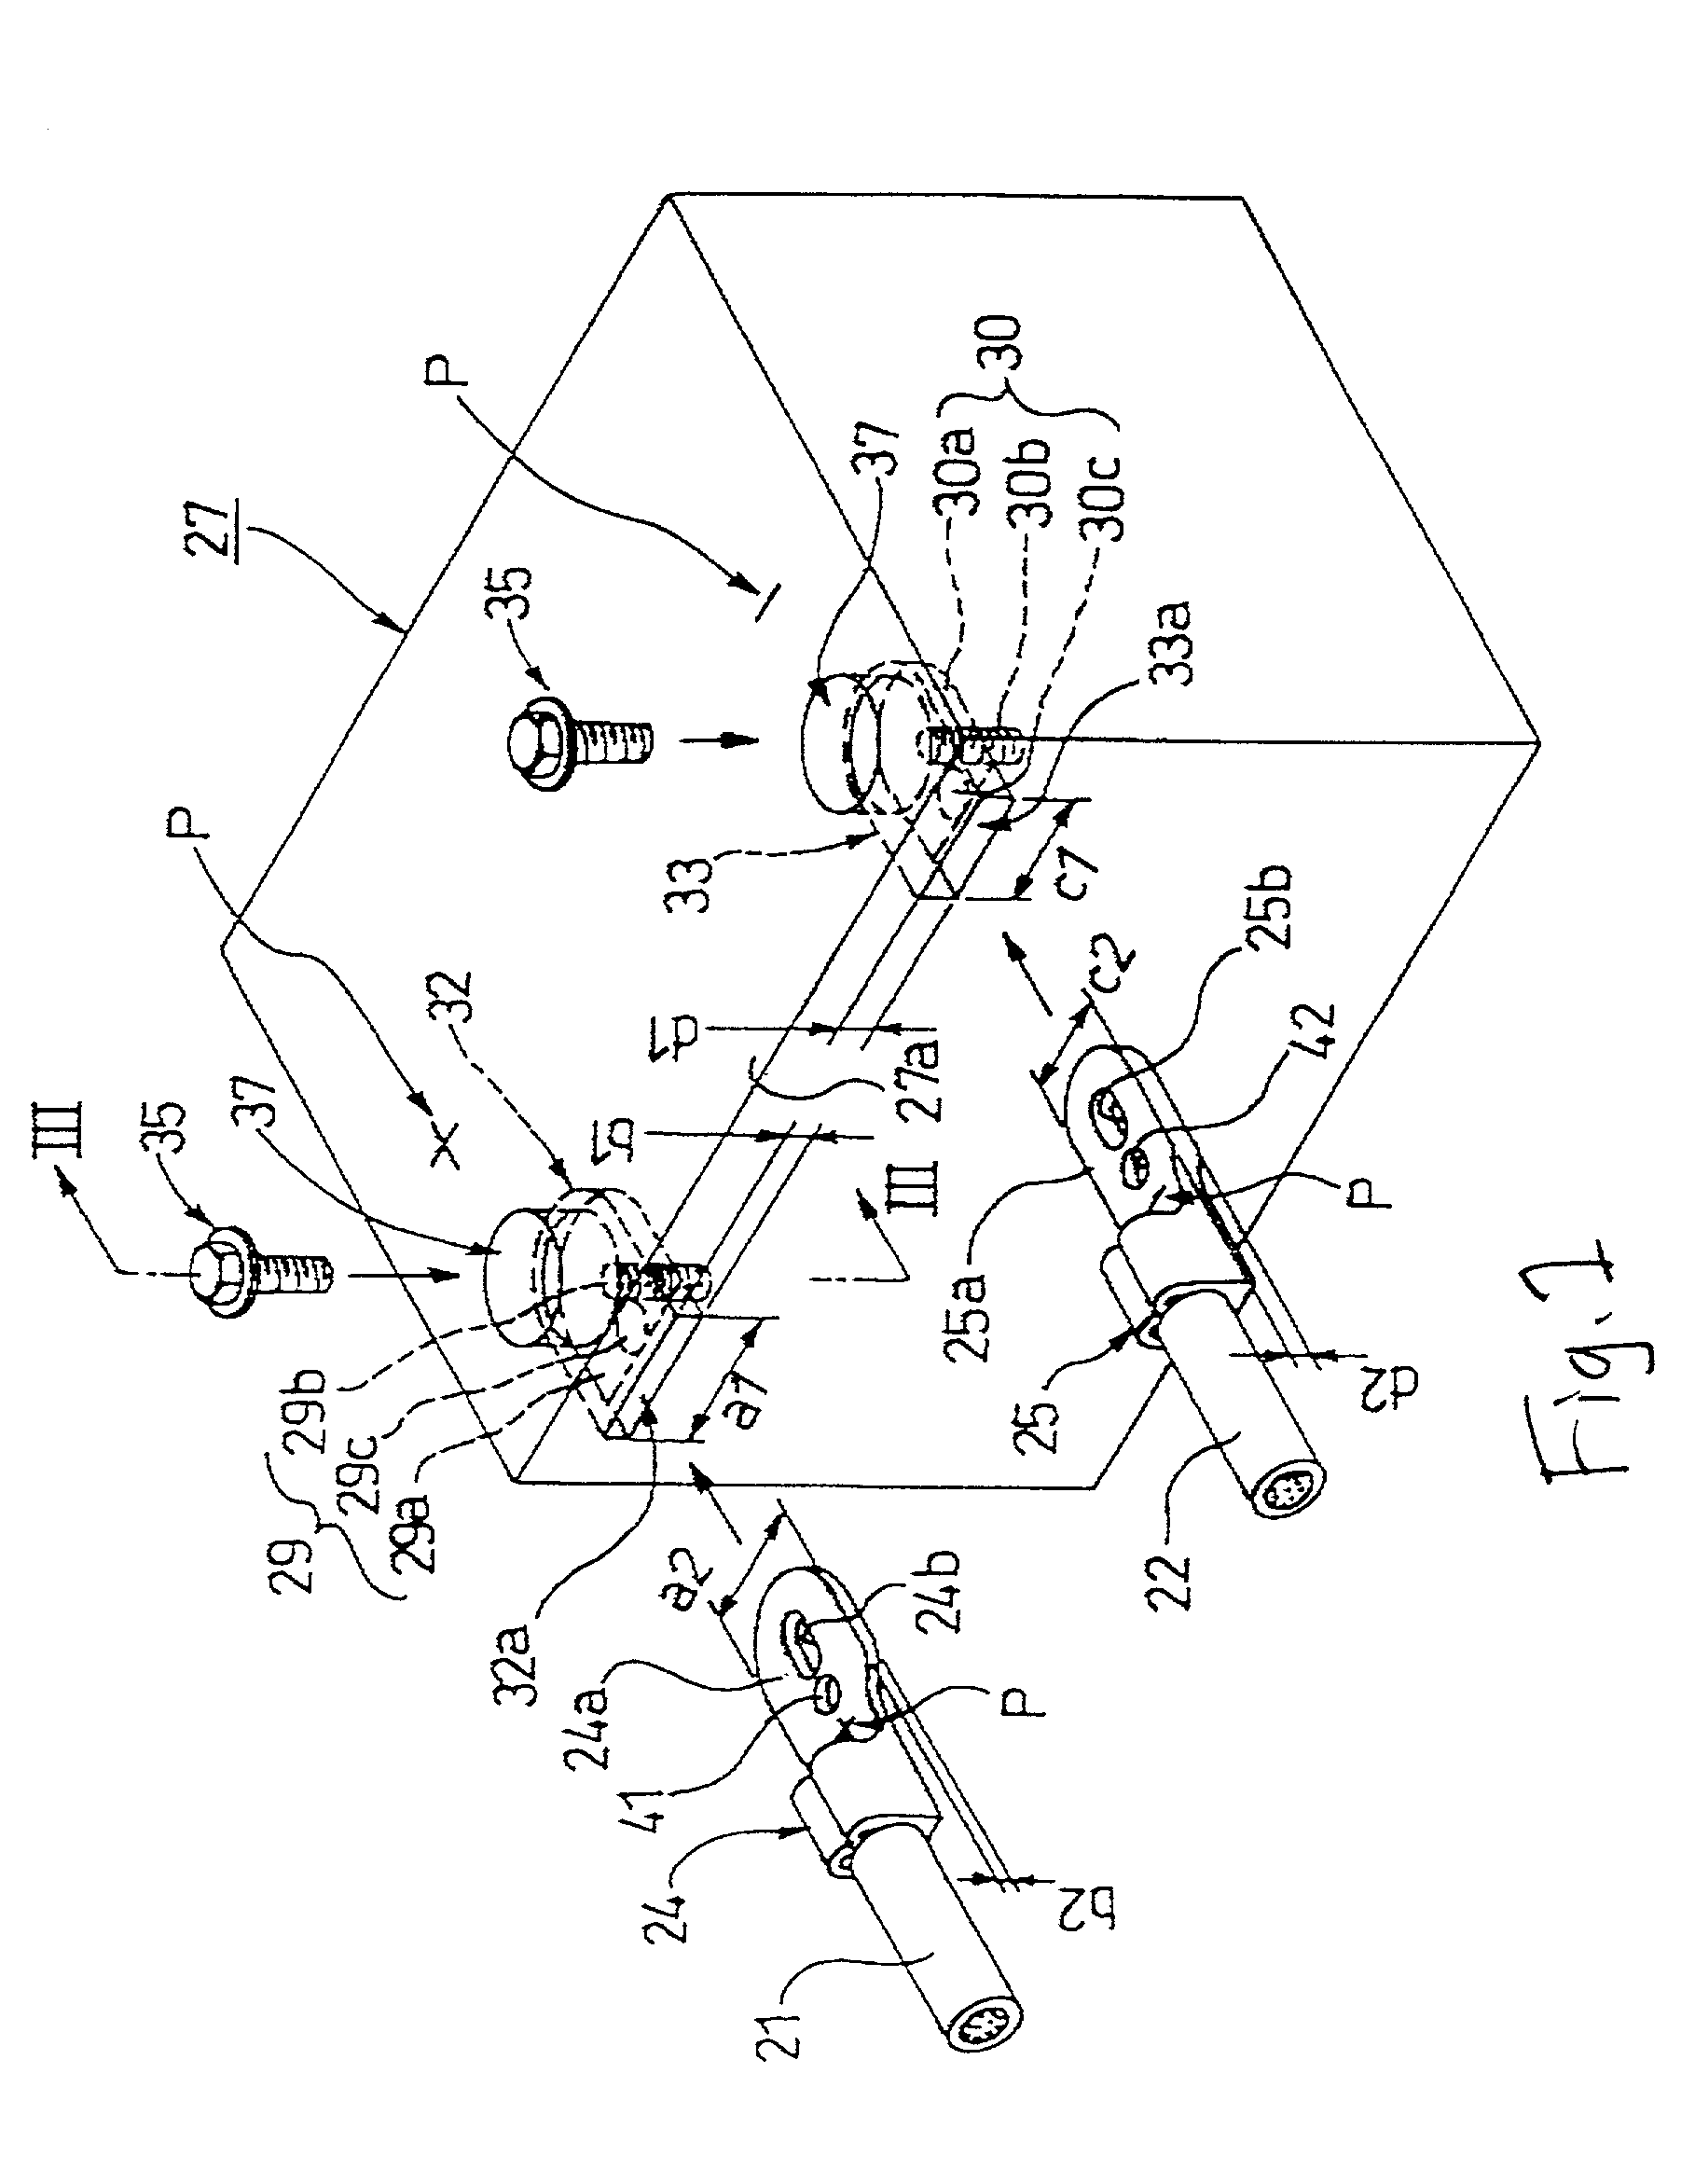 Connecting structure for battery terminals